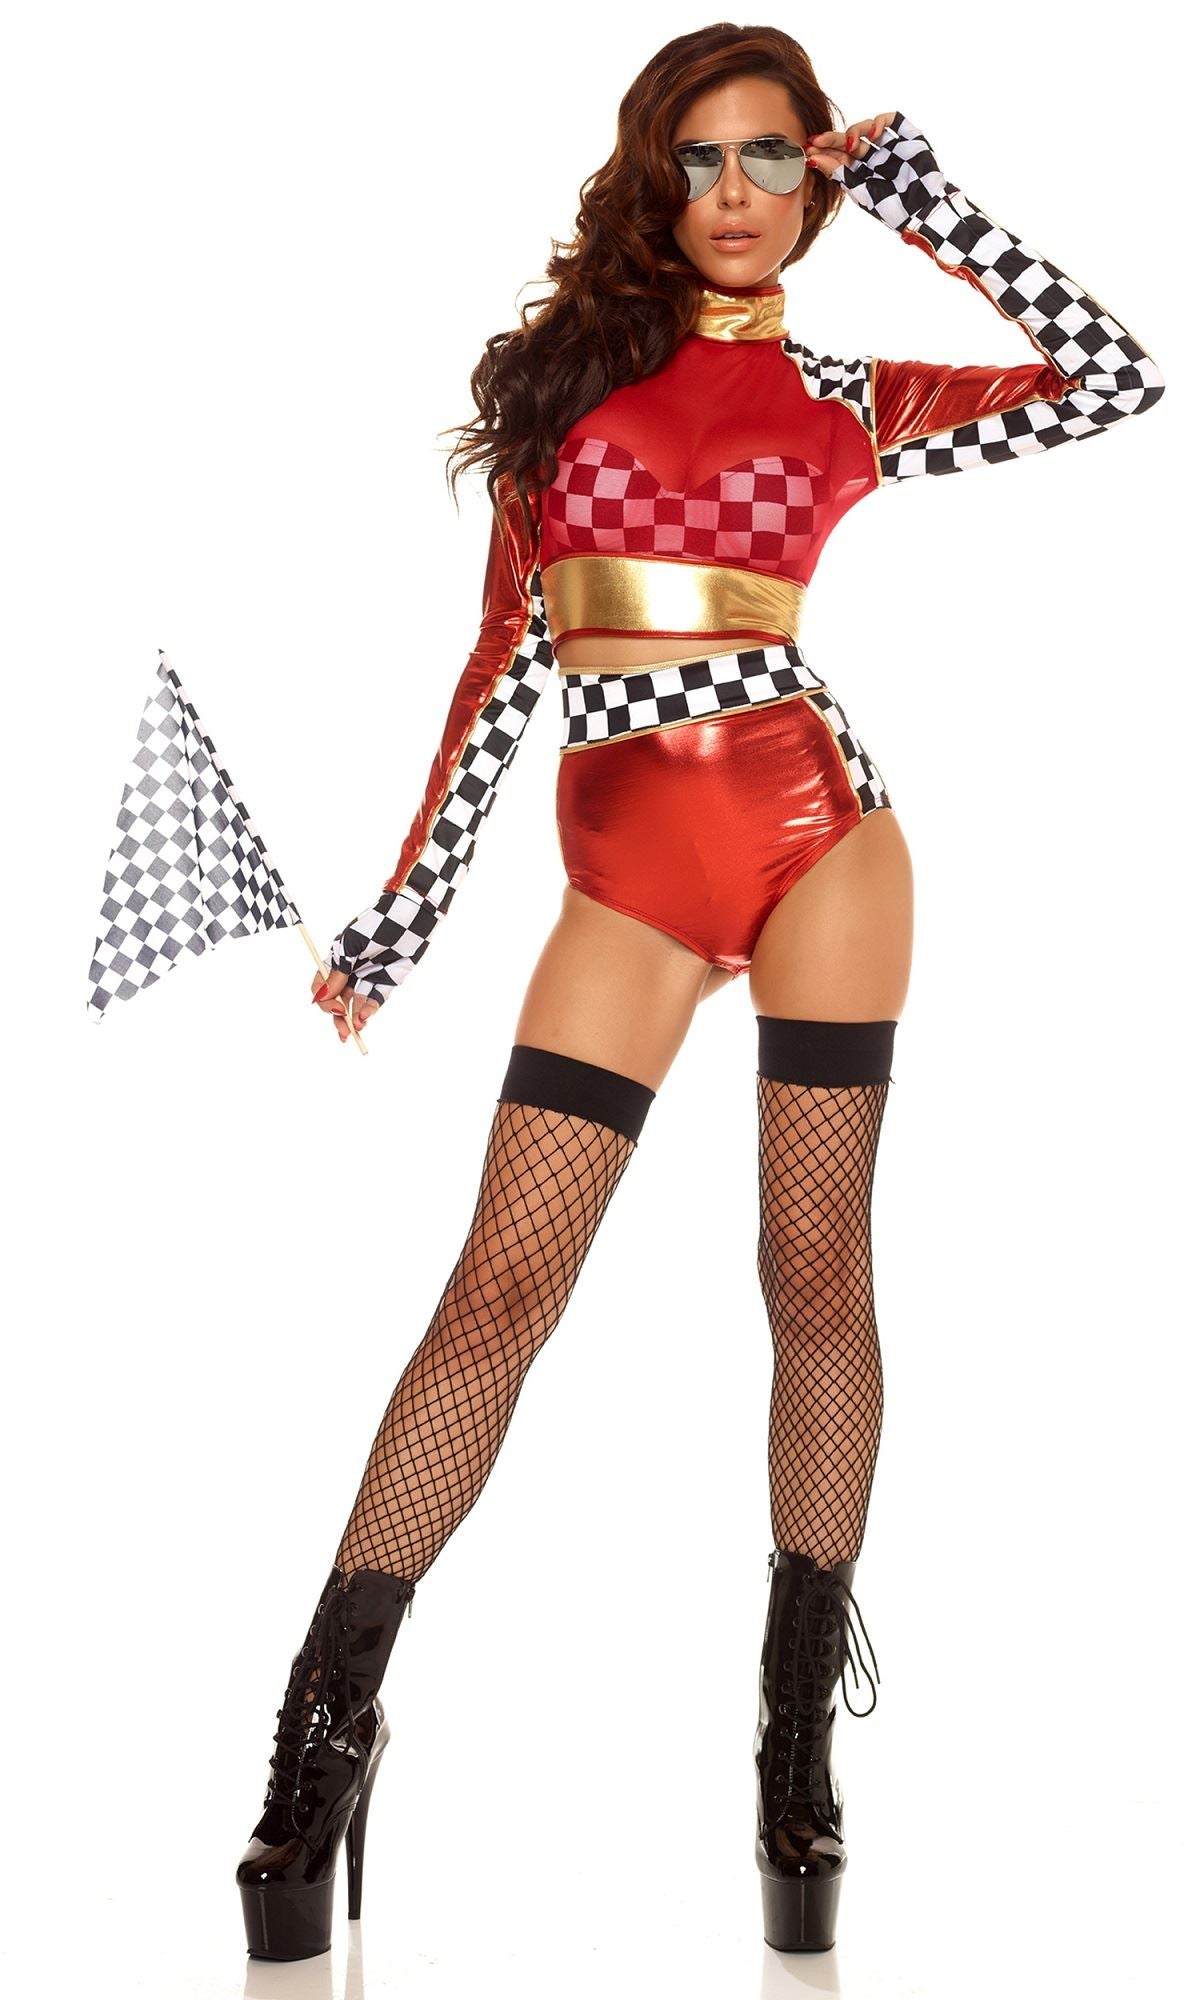 Racer Victory Lap Metallic Women Costume by Forplay Costumes only at  TeeJayTraders.com